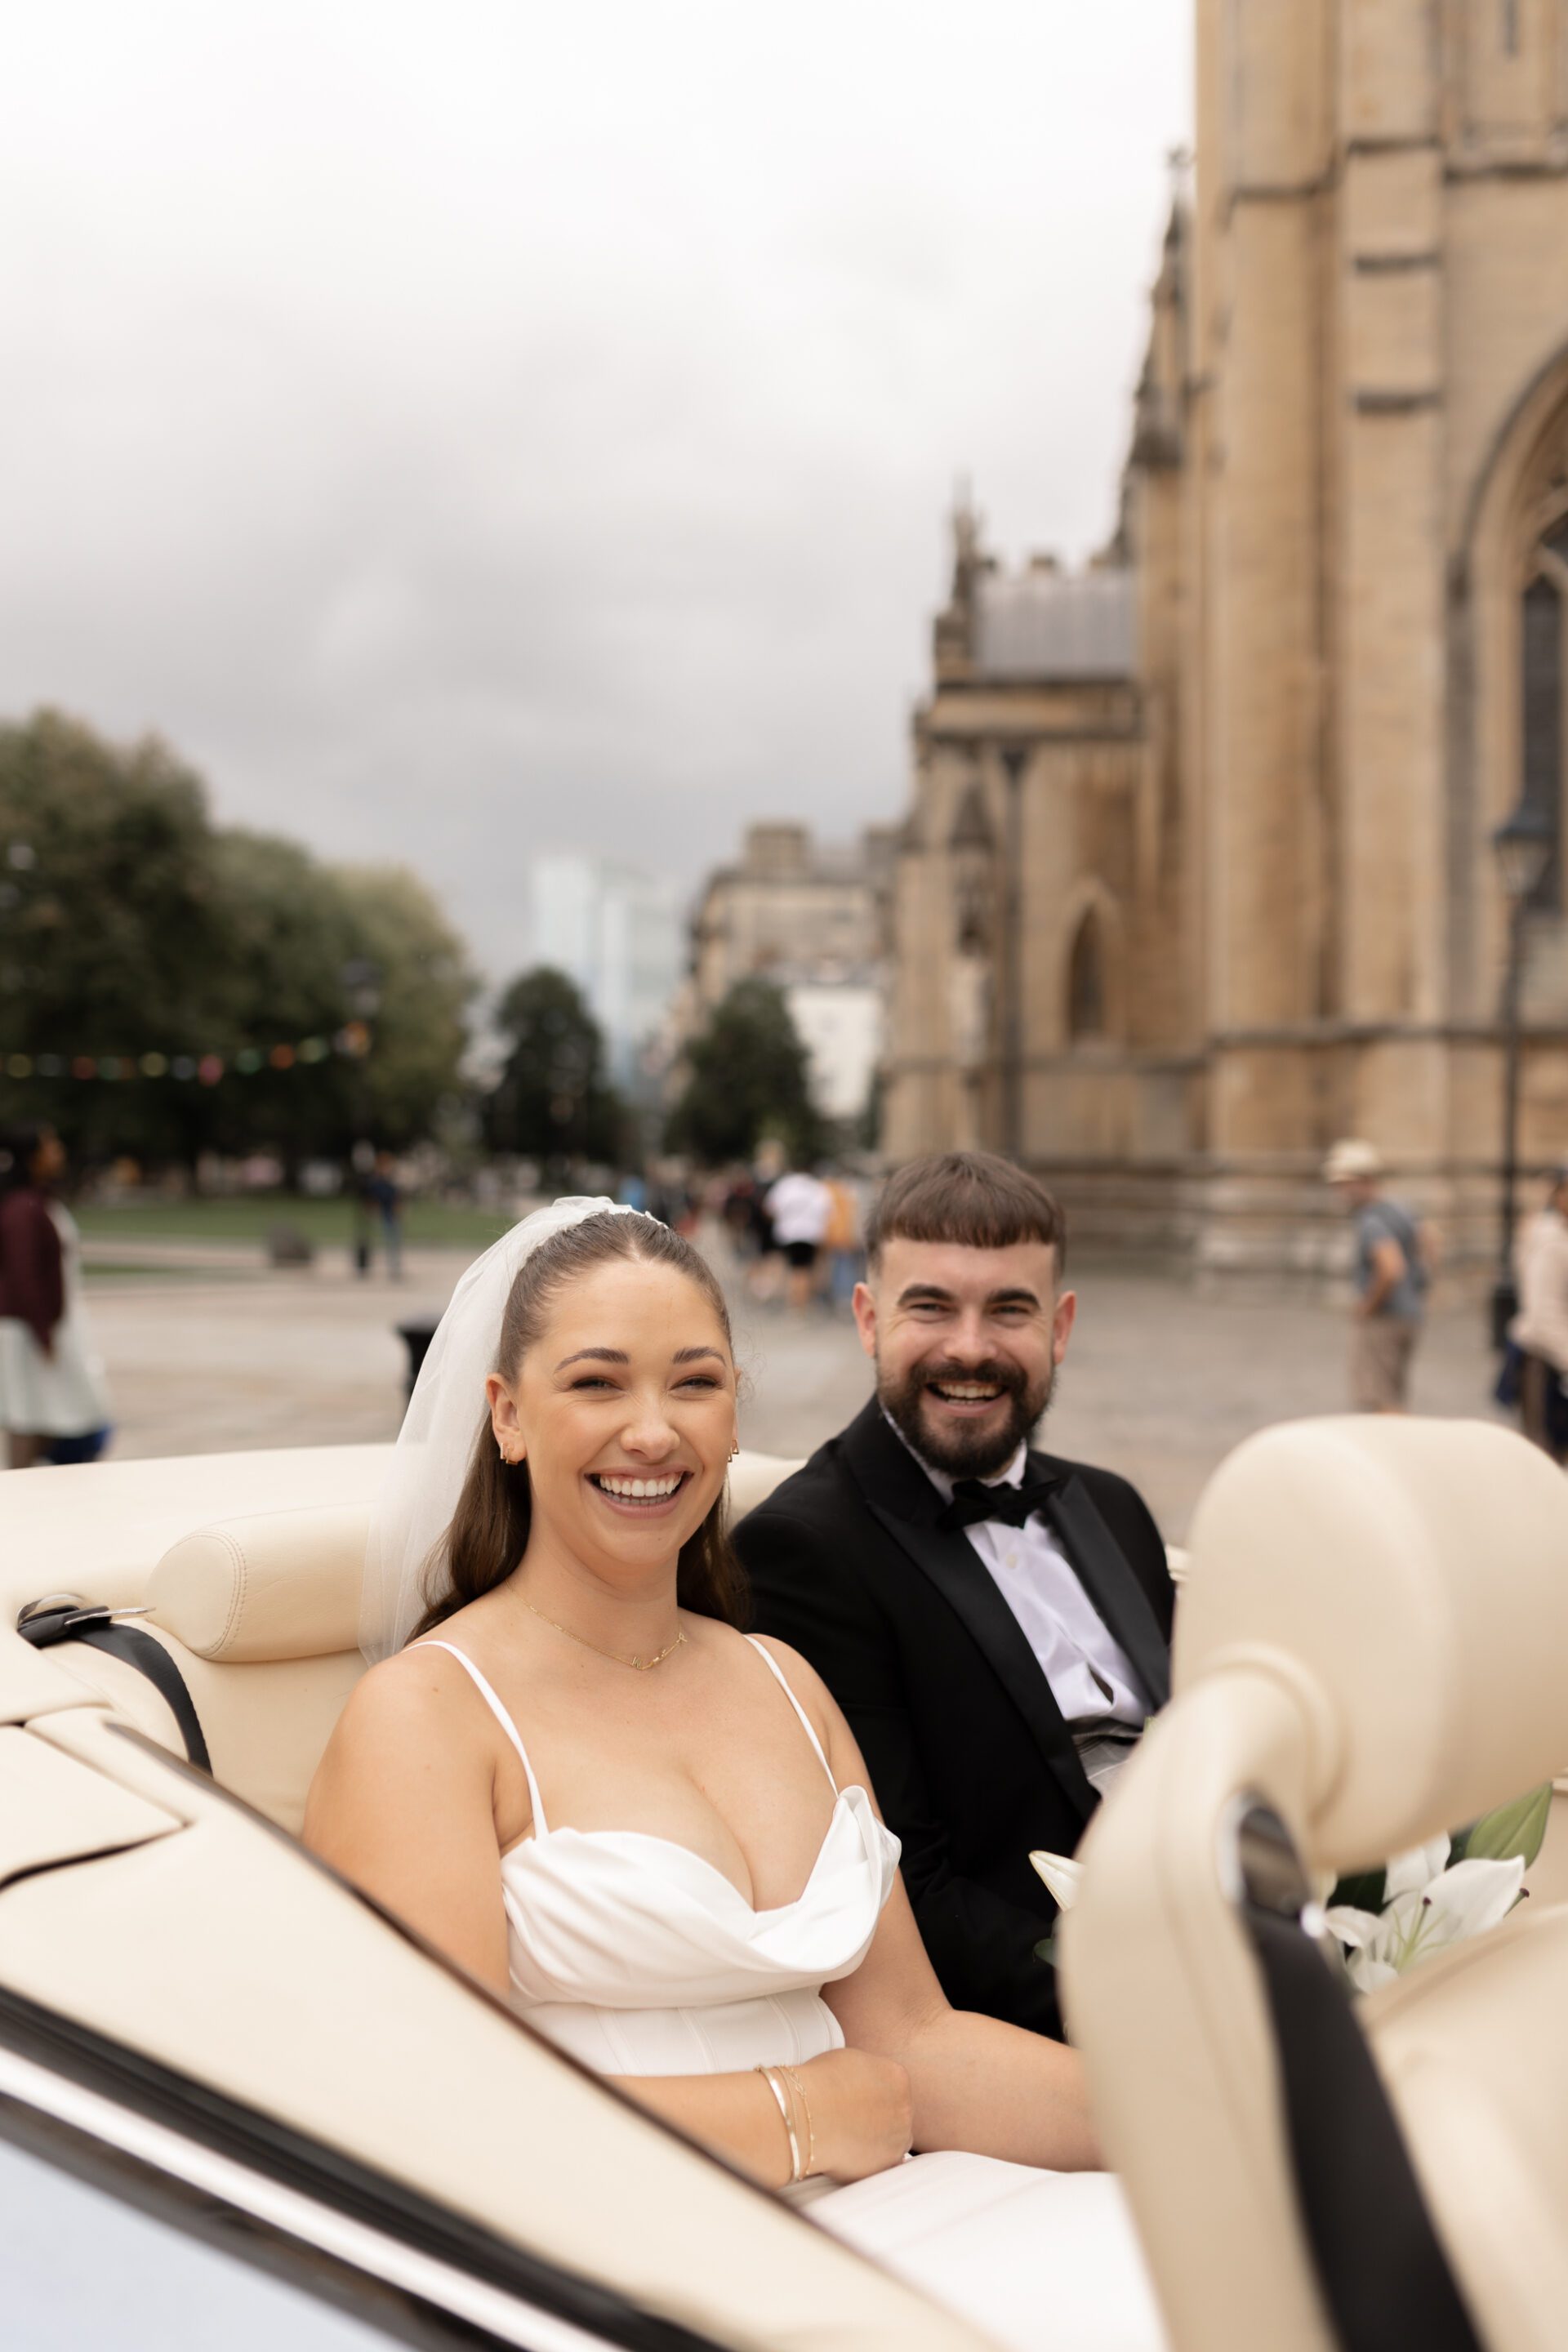 Couple portraits in a classic vintage wedding car during our editorial couples portrait session